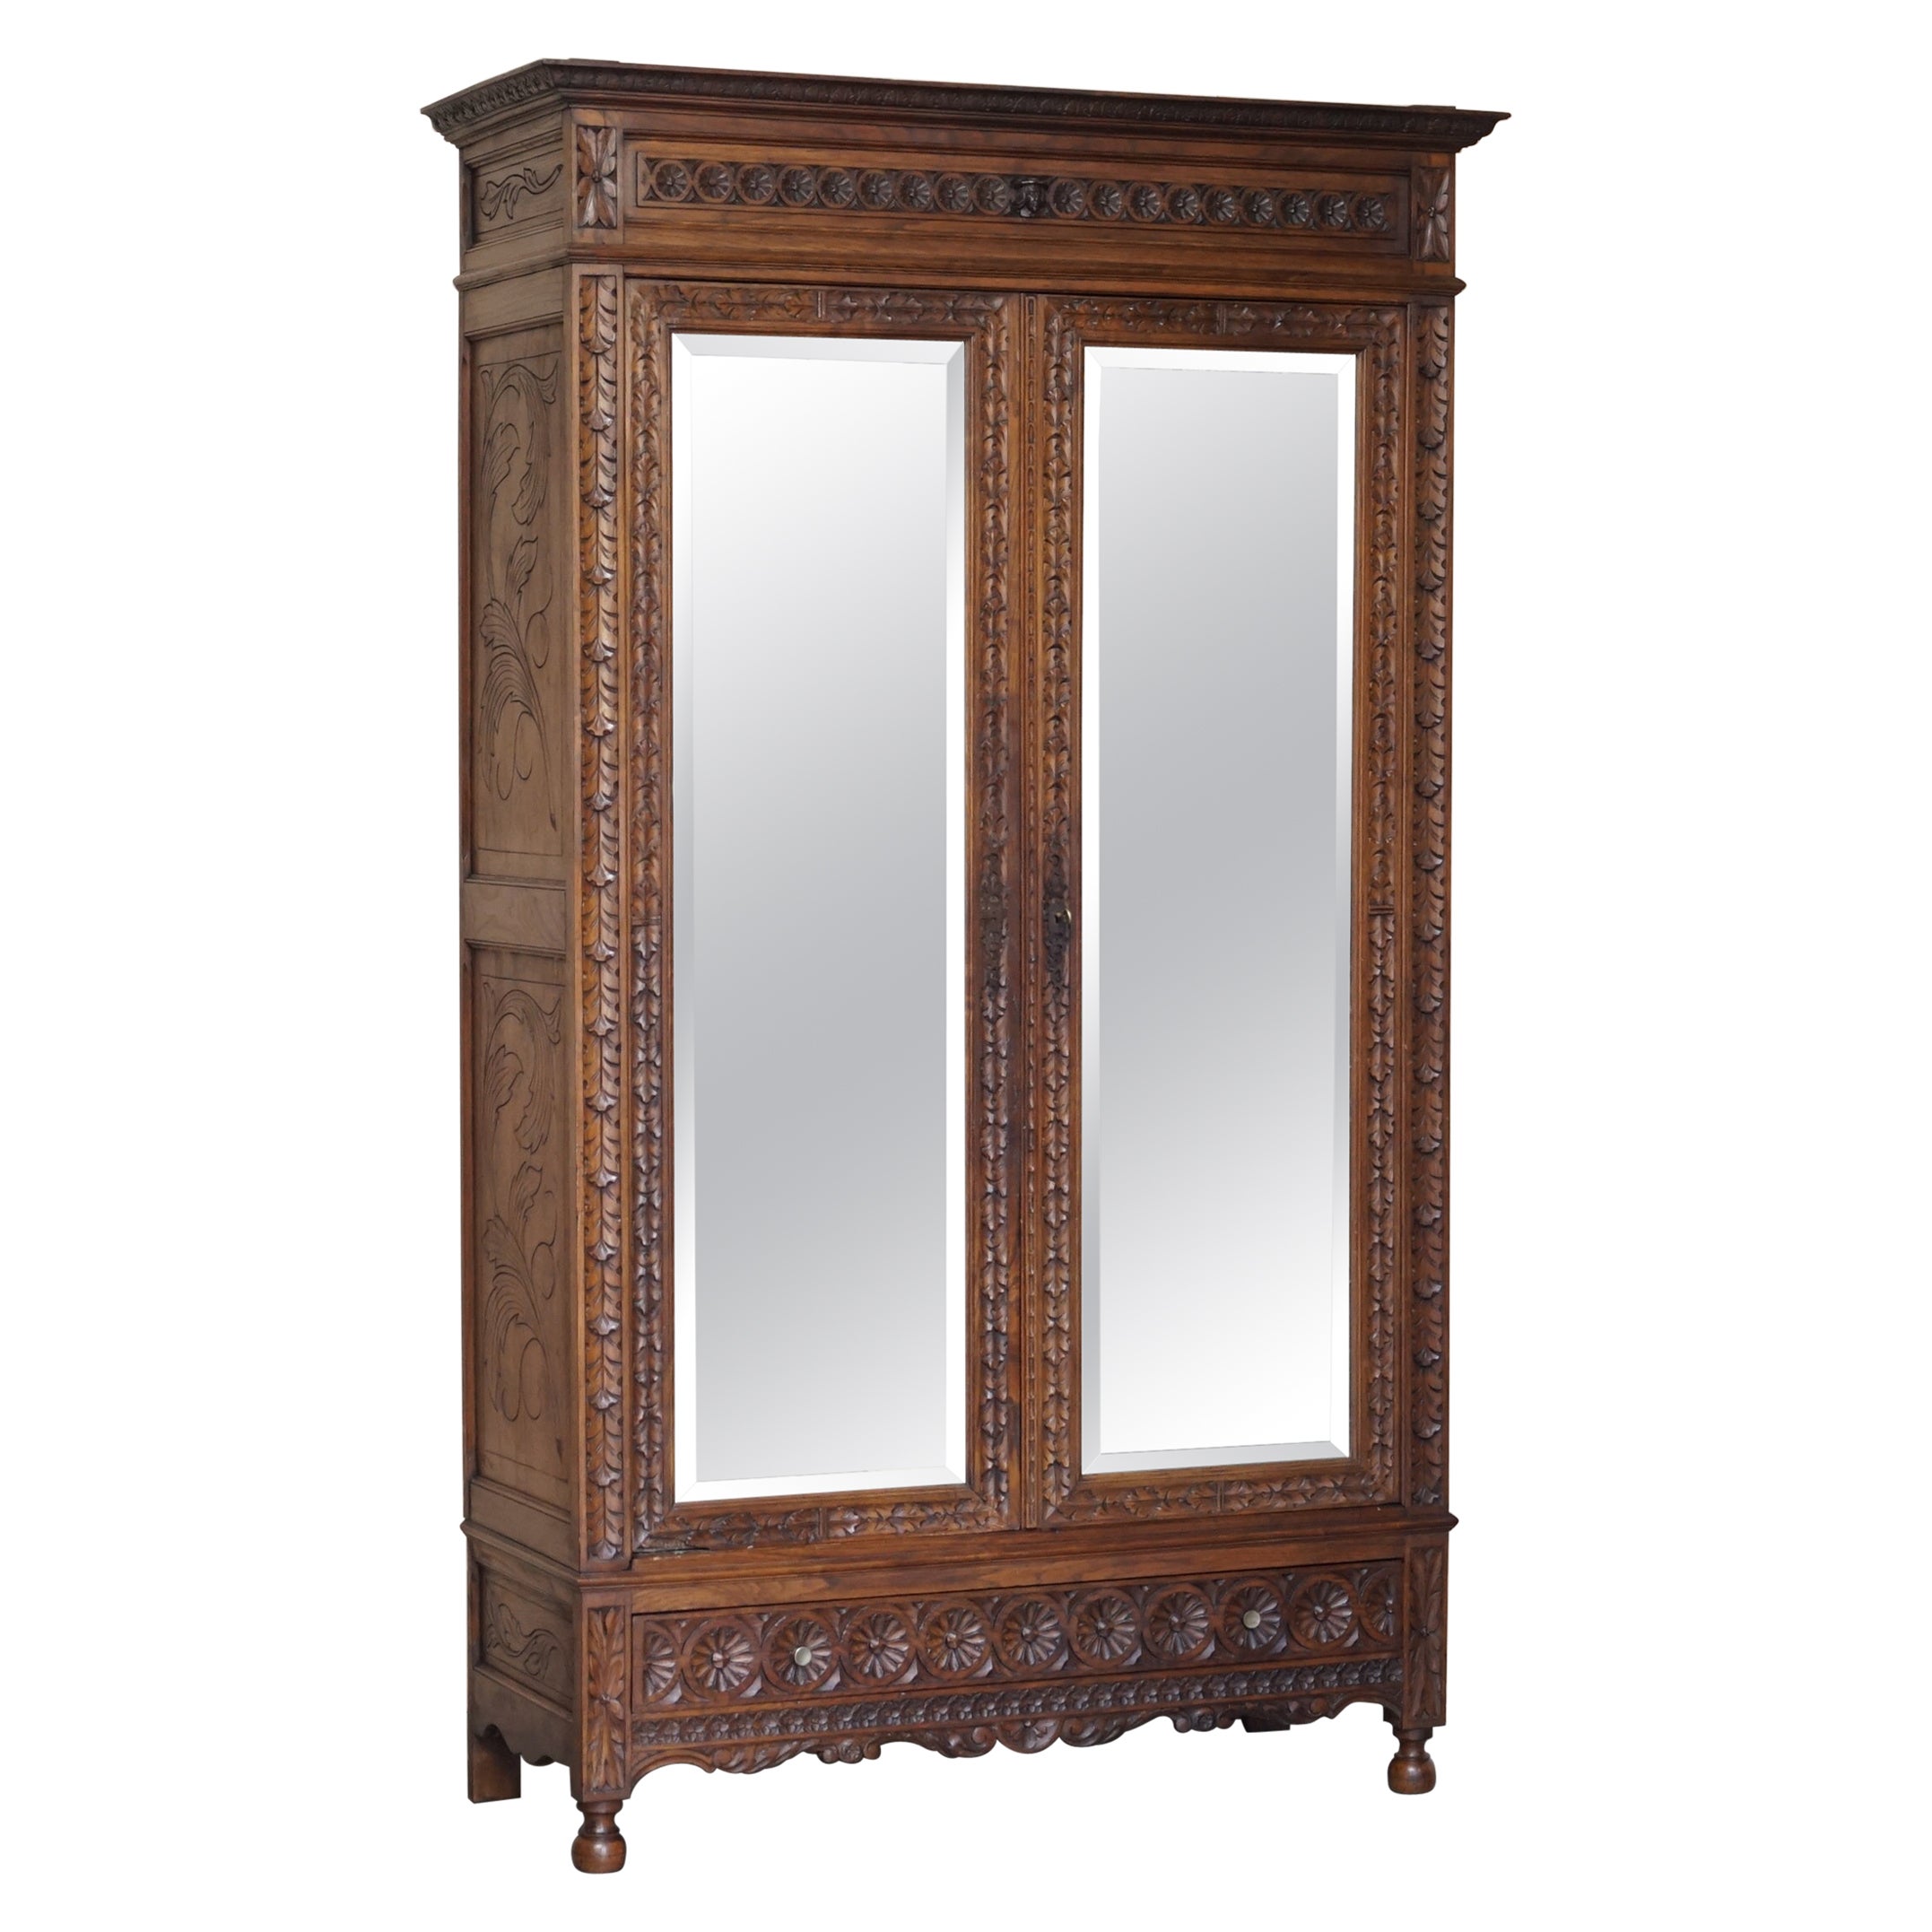 Carved Dutch Antique circa 1880 Armoire Folded Lined Wardrobe Mirrored Doors For Sale